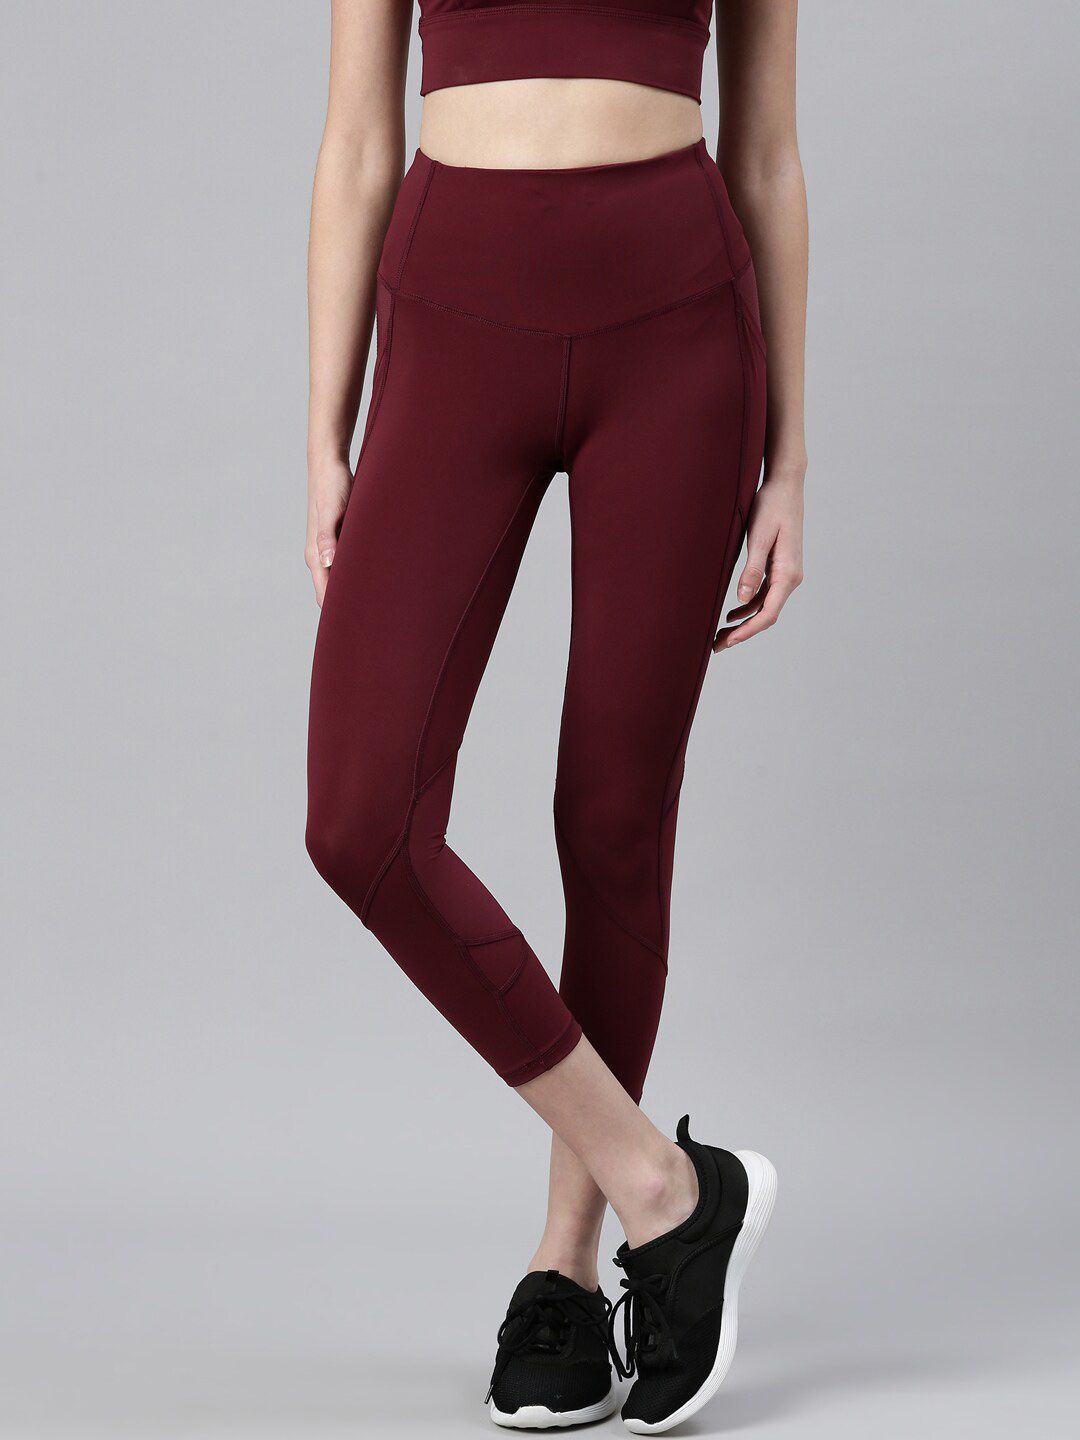 Enamor Women Plus Size Maroon A603-Dry fit High Waist With Antimicrobial Tights Price in India